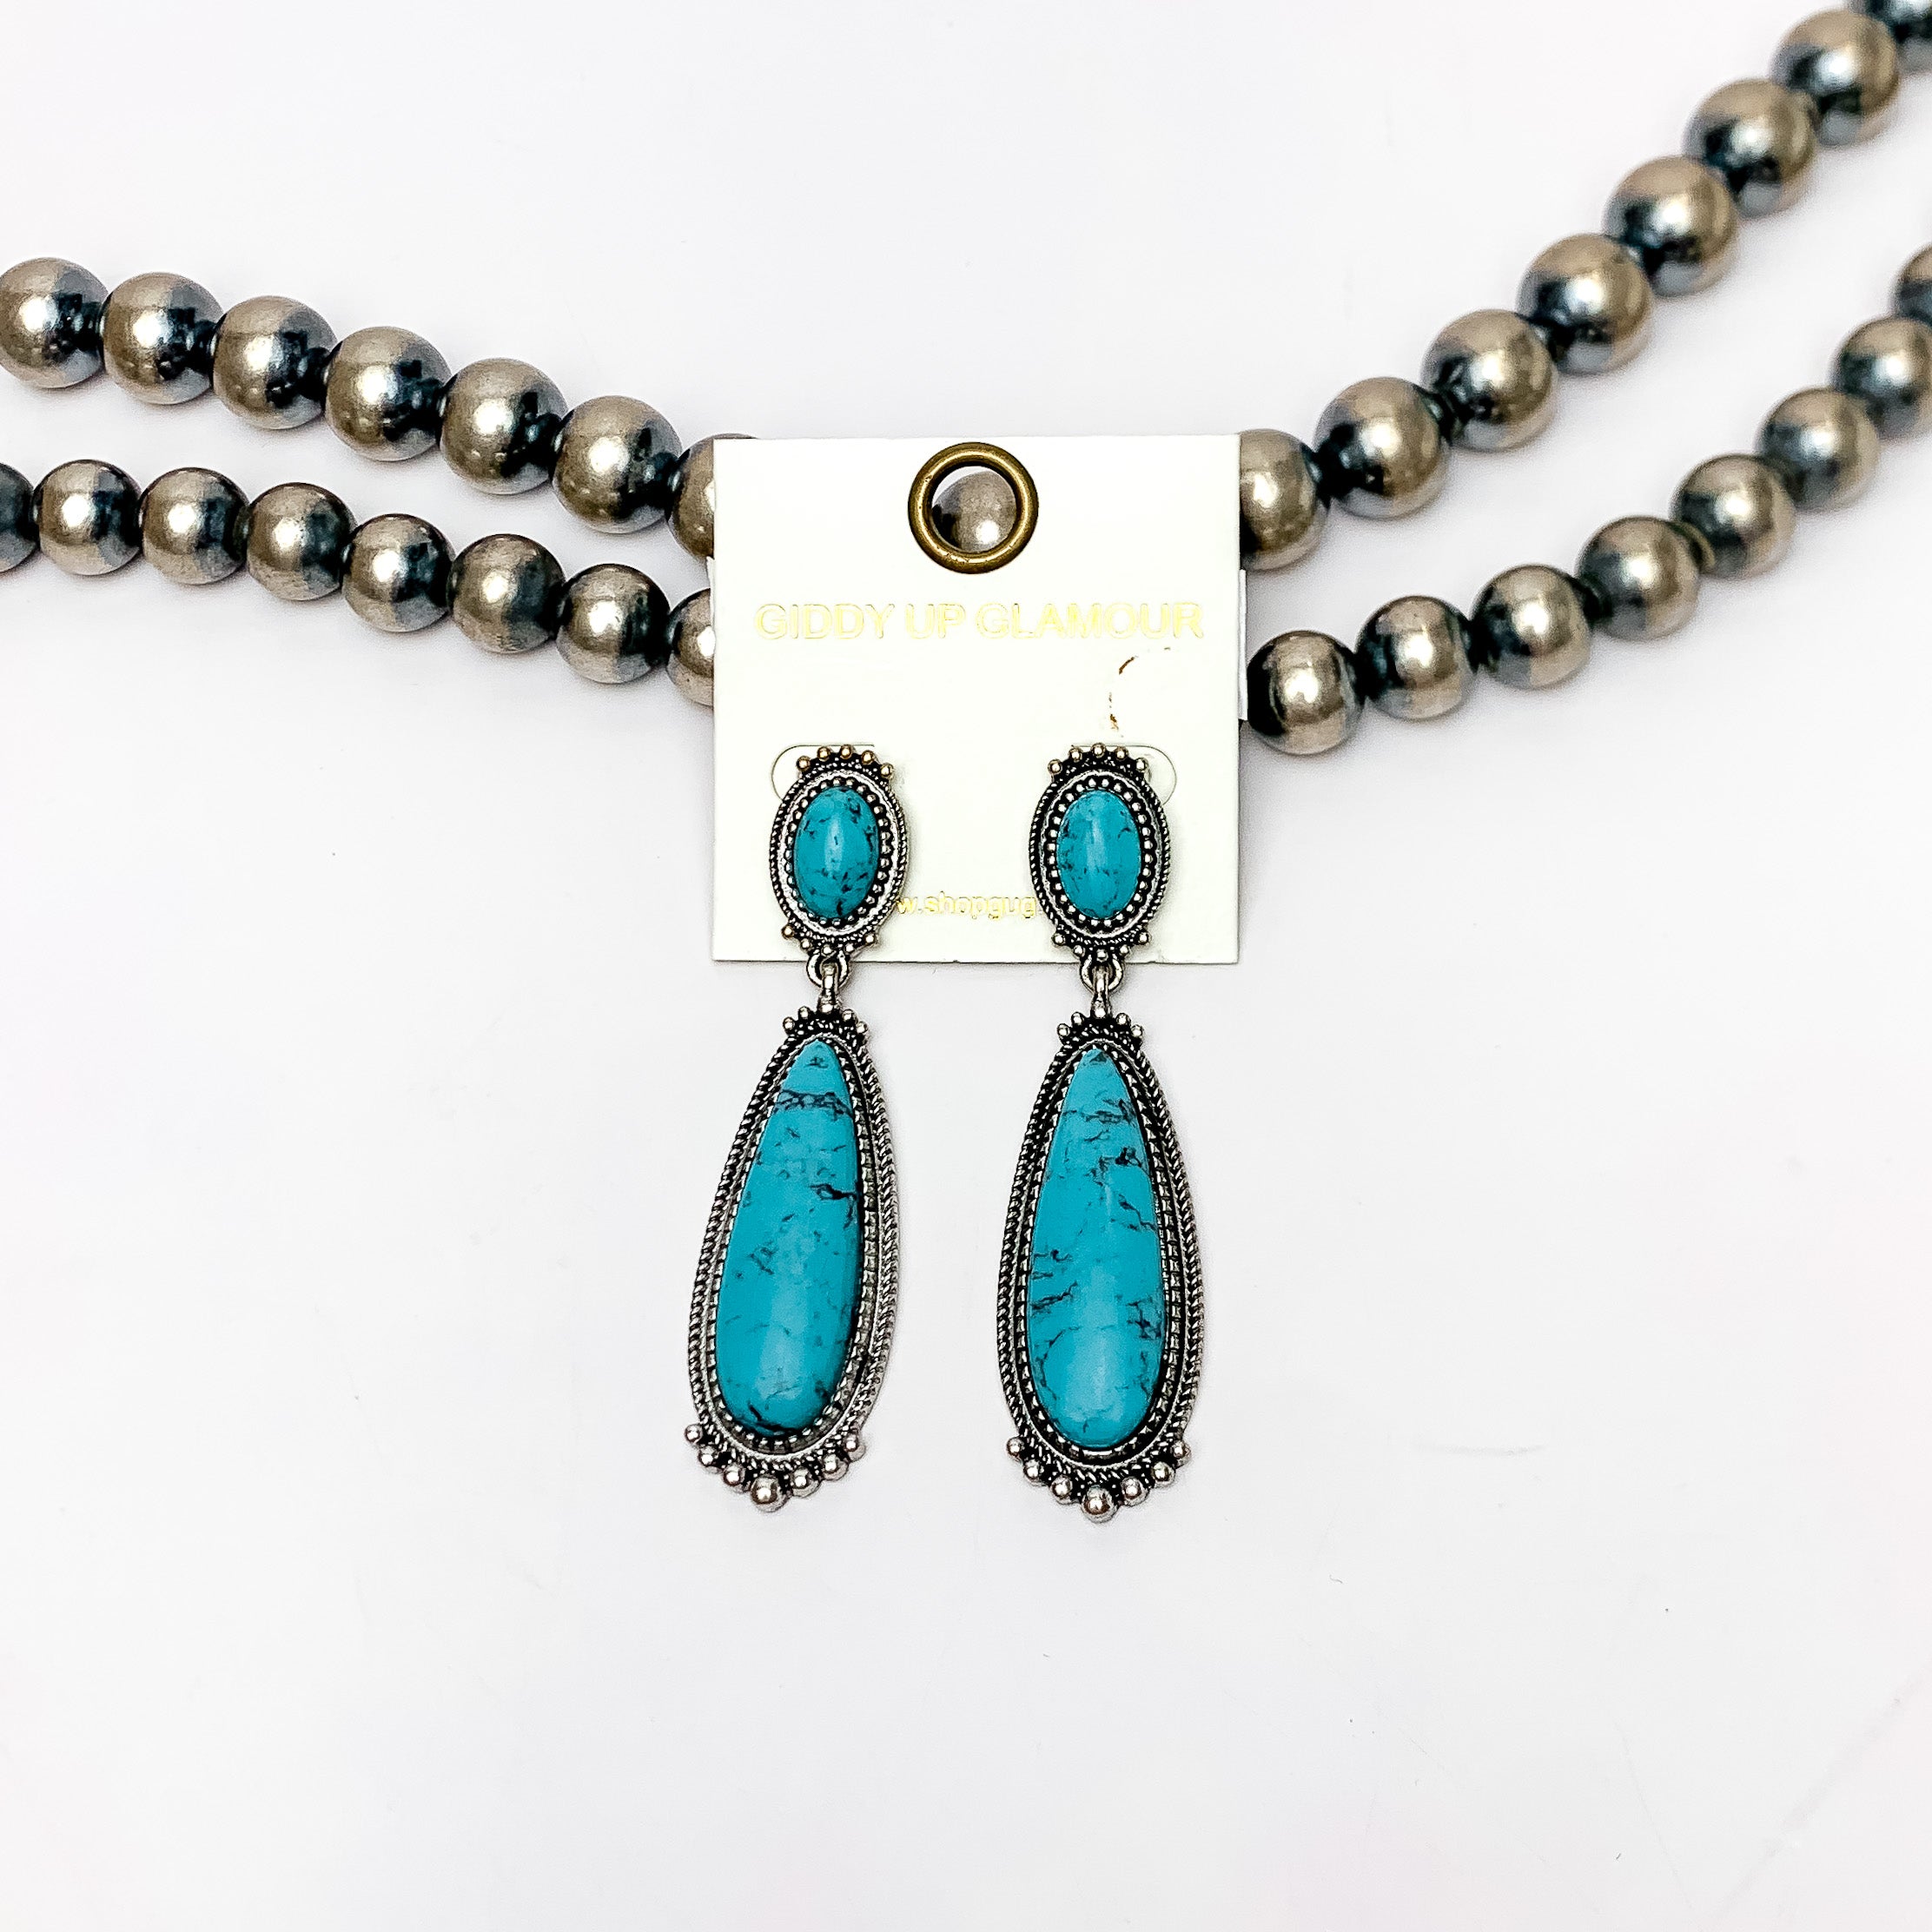 Southern Saturdays Silver Tone Drop Earrings in Turquoise Blue. These earrings featured two large stones. The background of the picture is white and the earrings are laying against Navajo pearls.